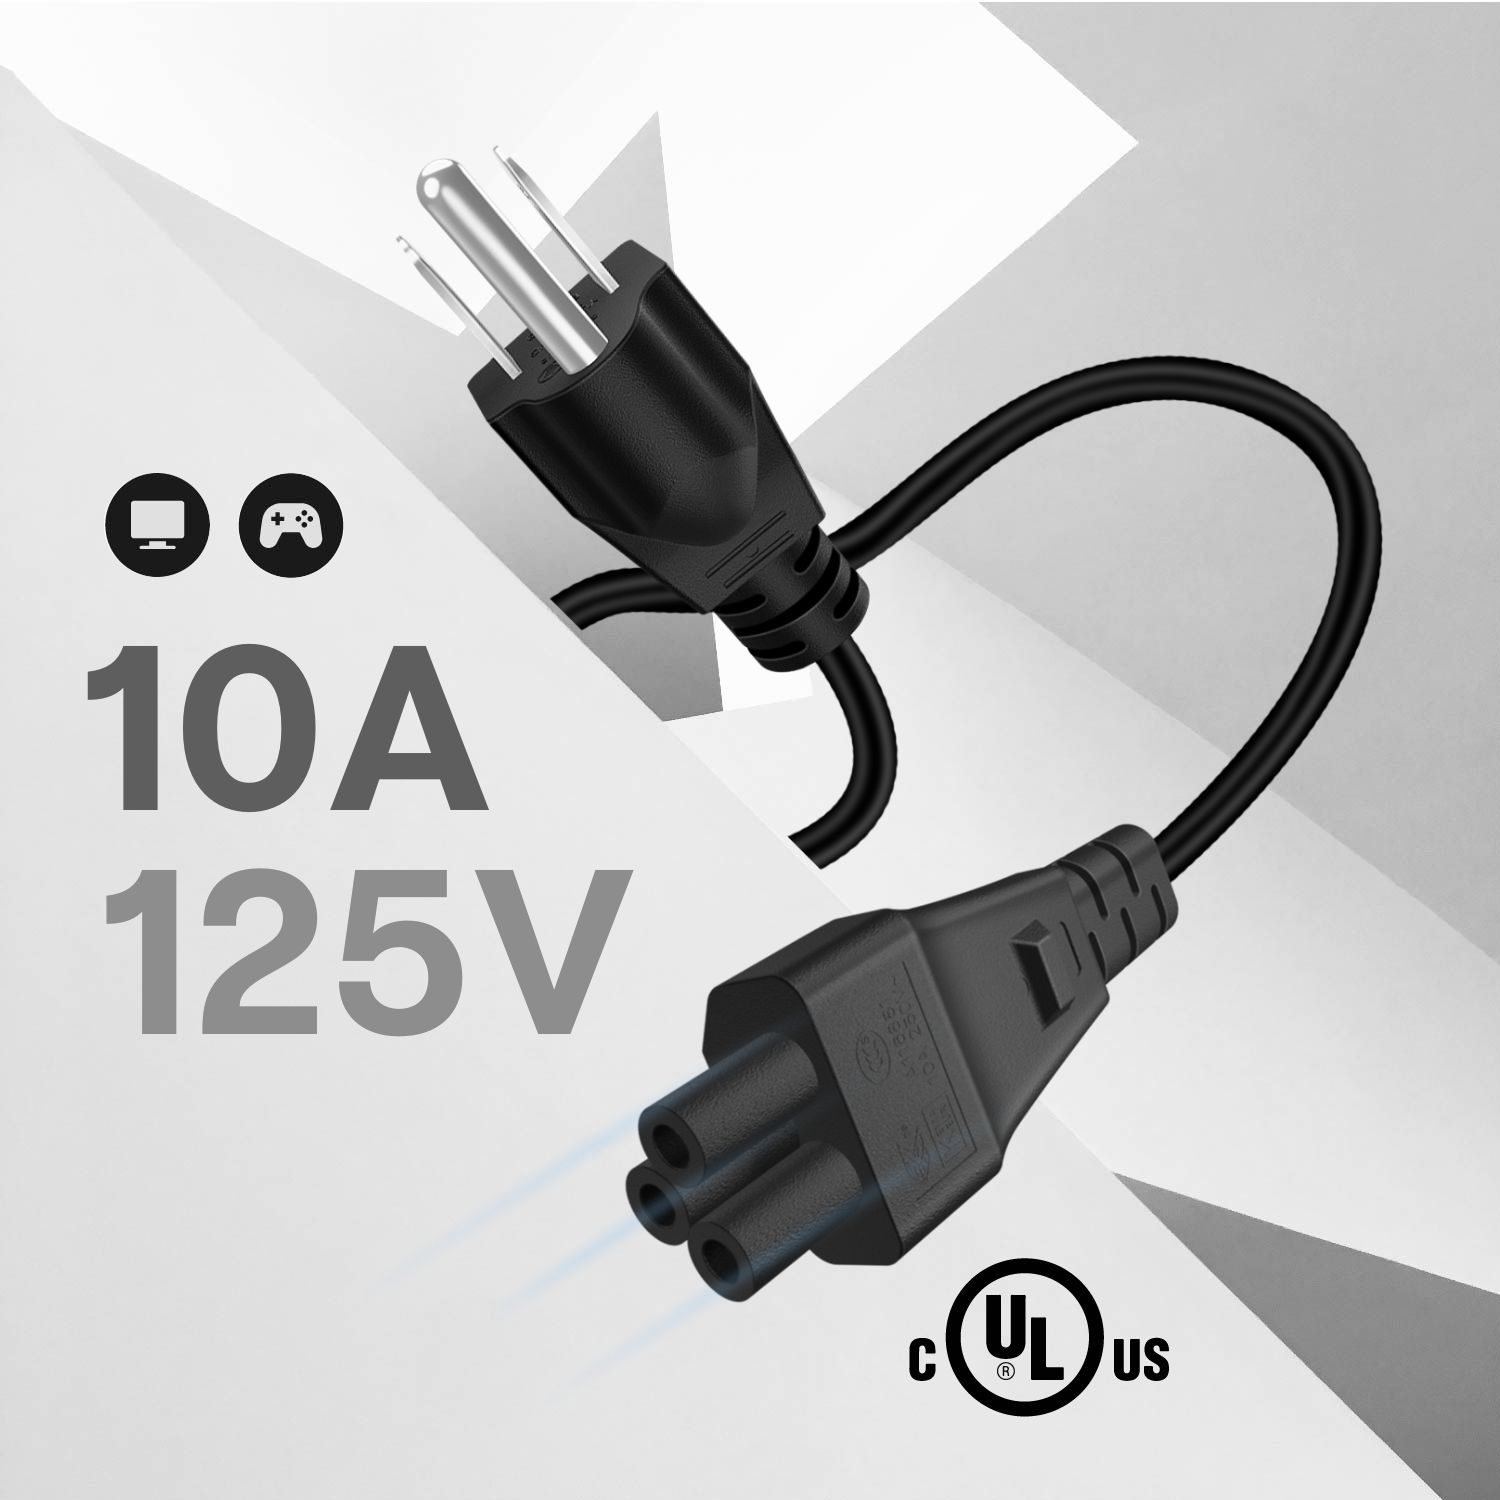 Replacement power cord for most models of a PC laptop power supply adapter for Dell Lenovo IBM HP Compaq Asus Sony Toshiba  Acer Gateway MSI notebook computer that have a removable power cord and use the 3 prong mickey mouse type power plug connector